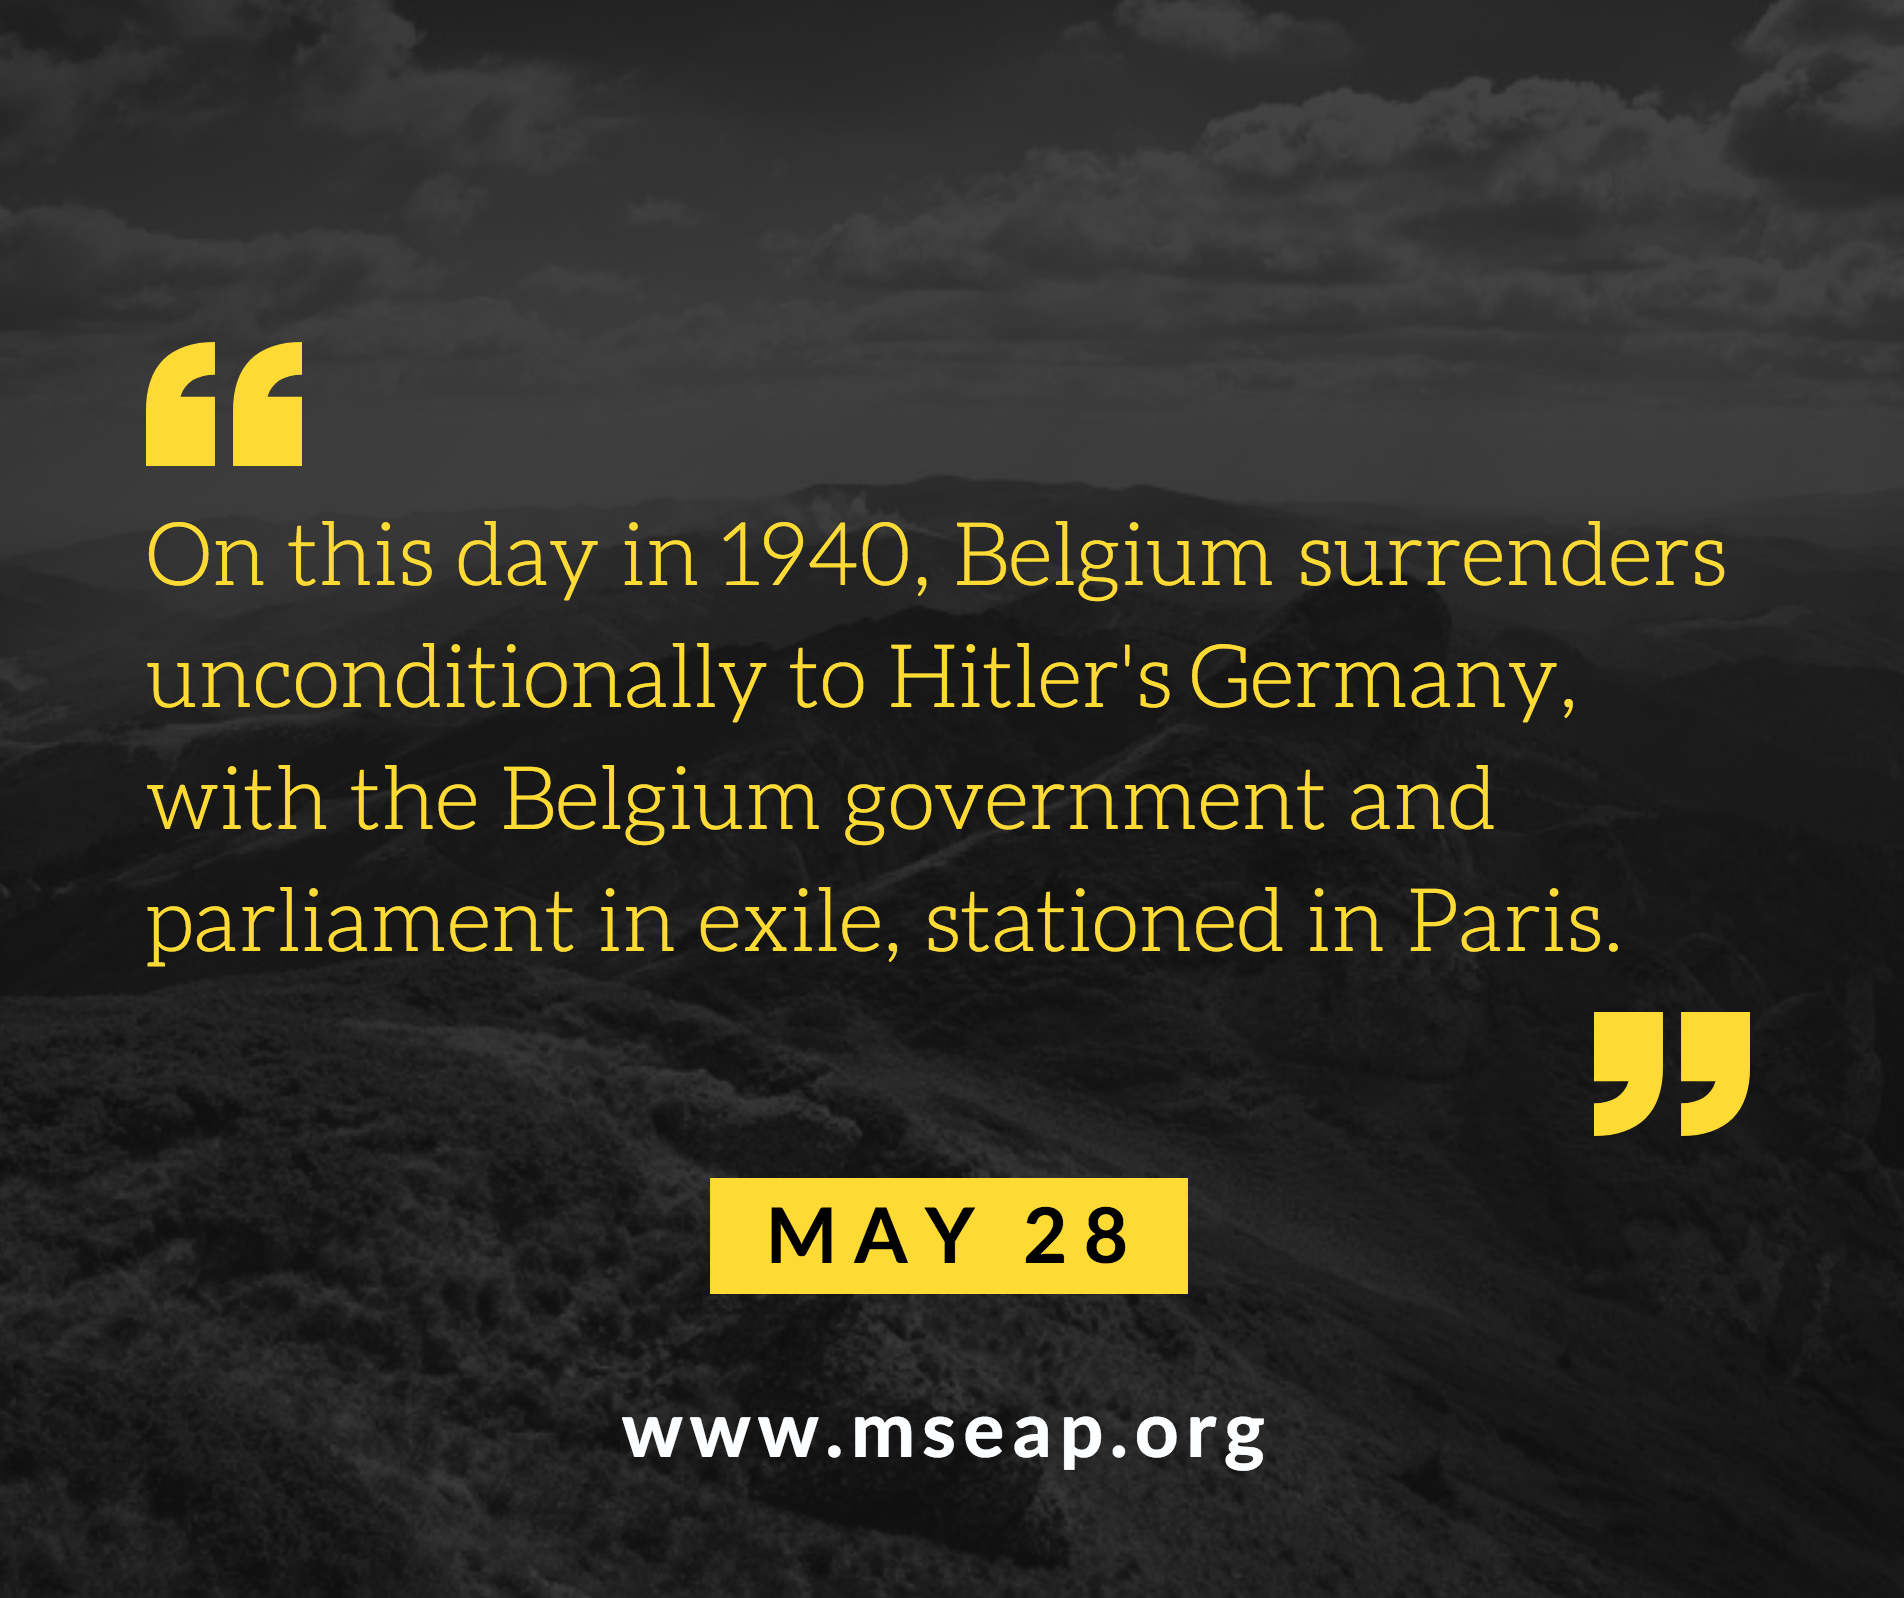 [Today in history] May 28